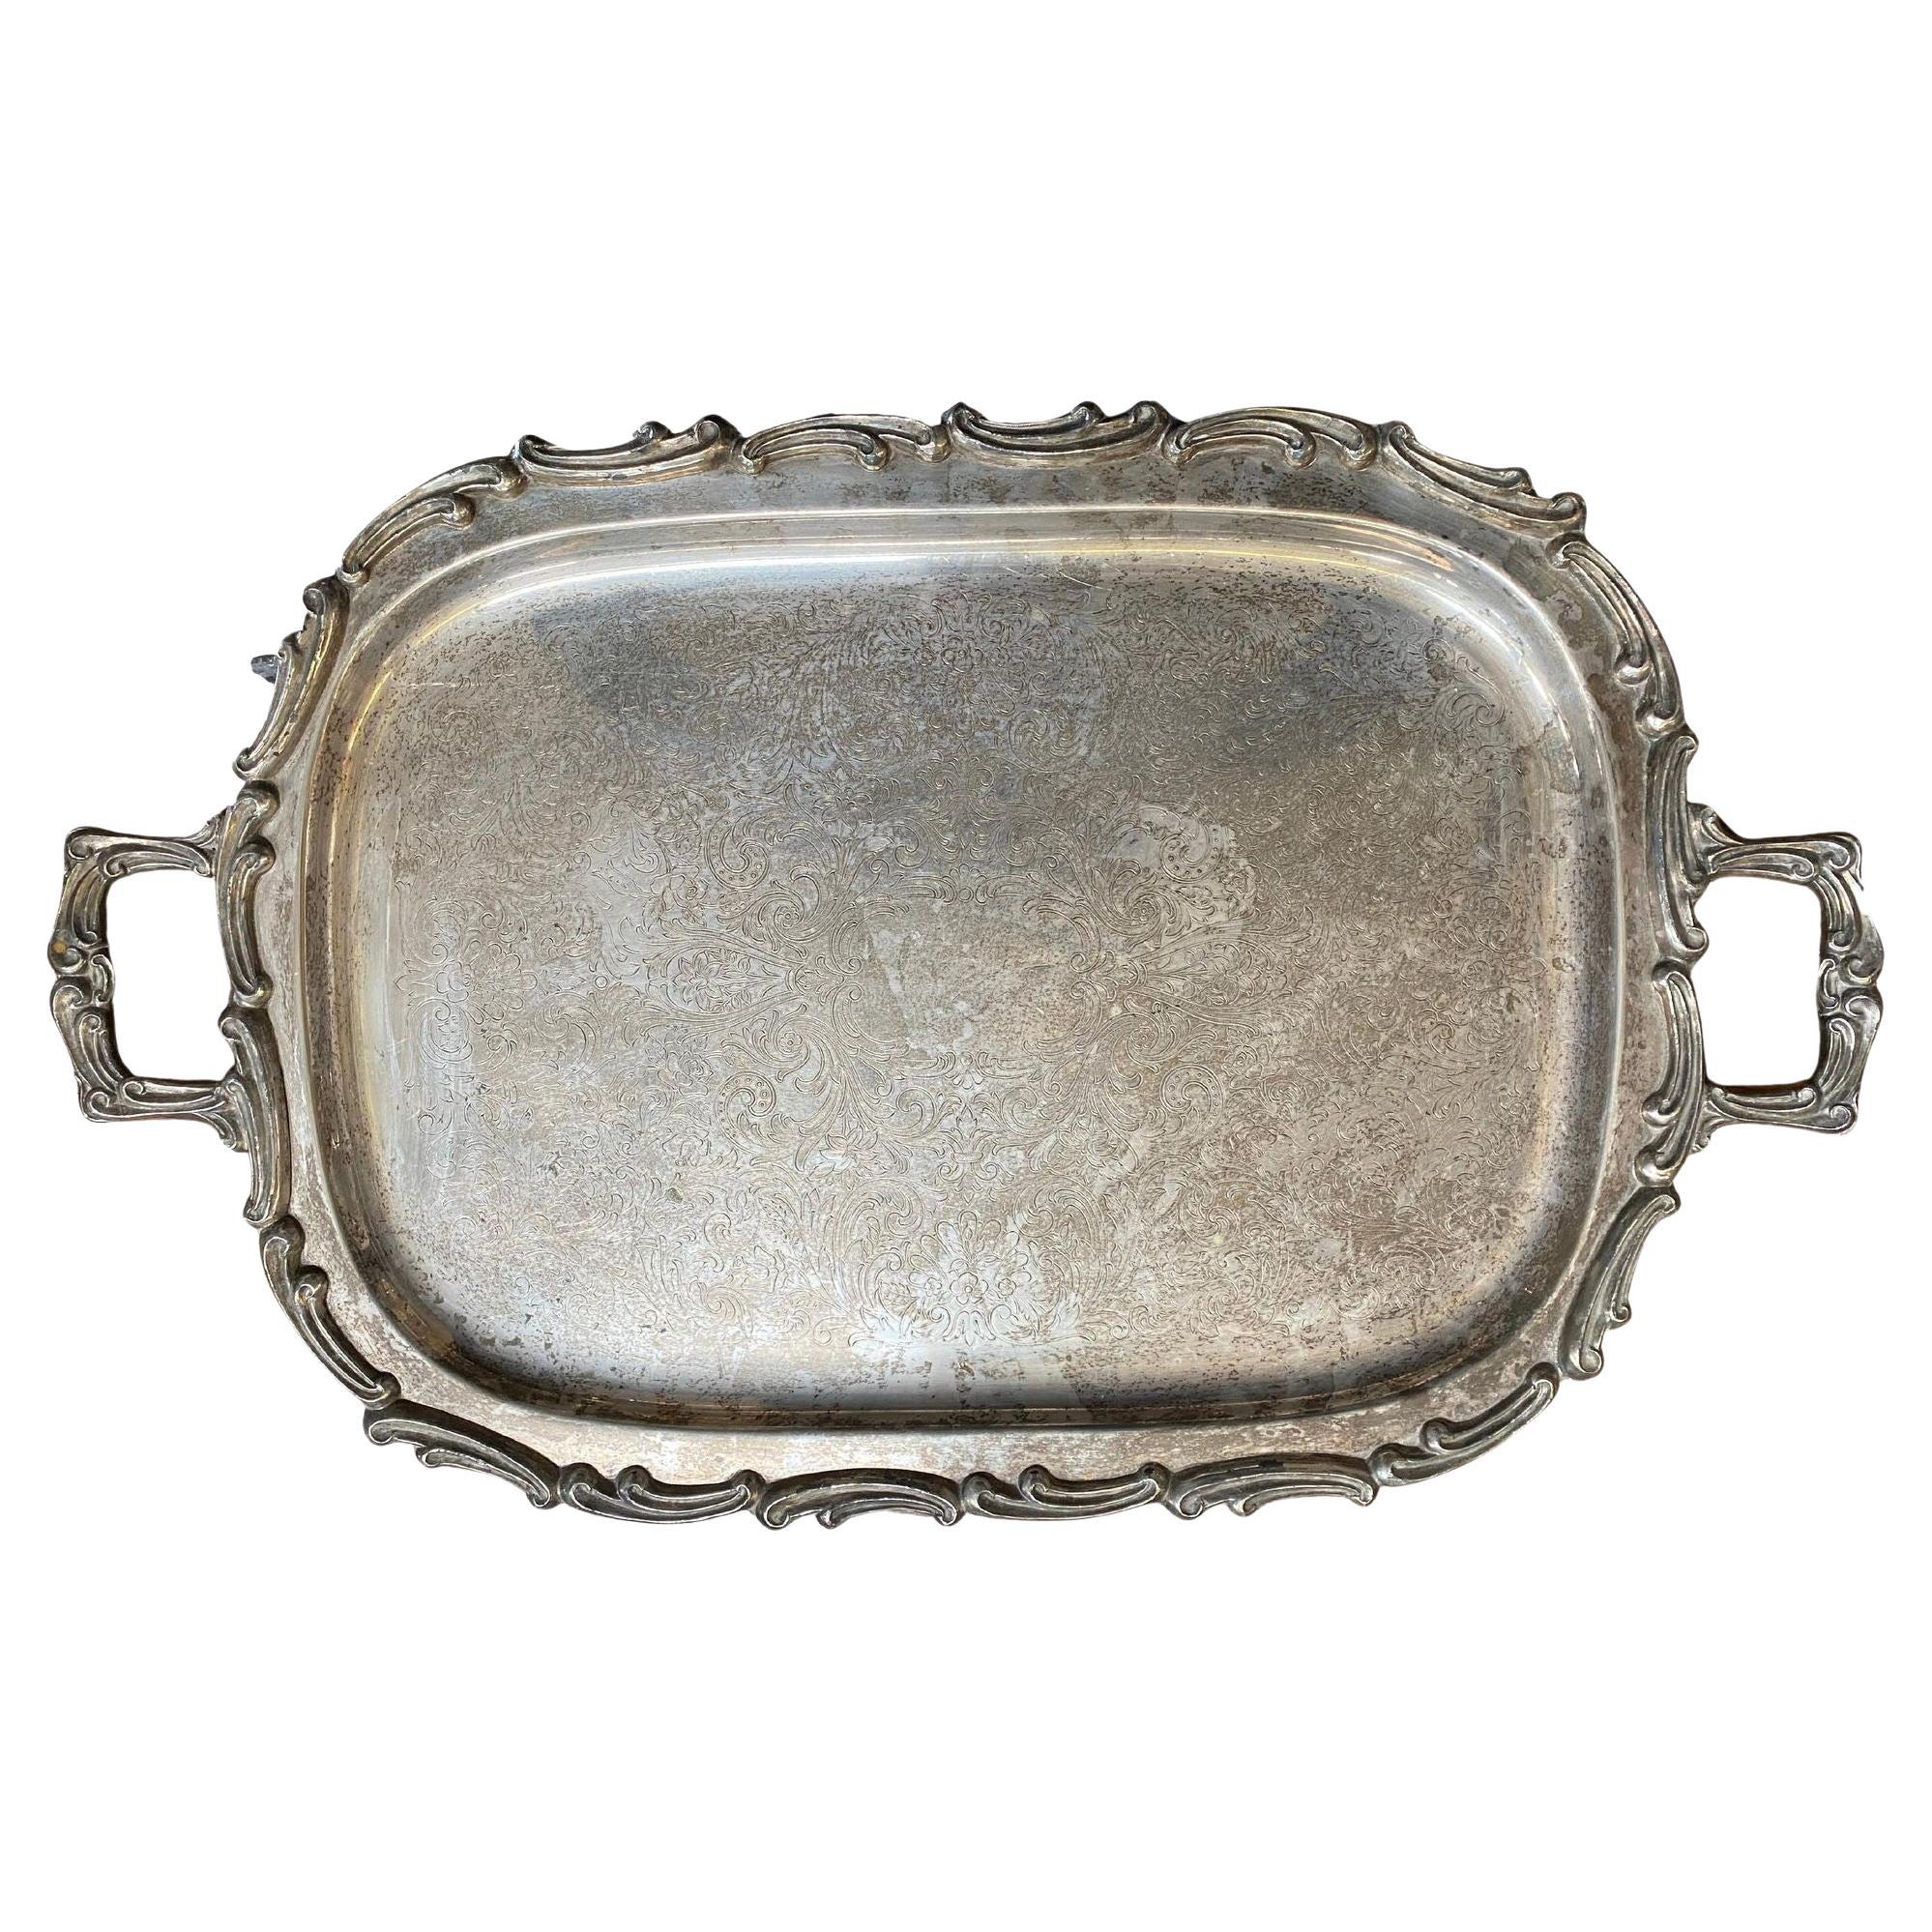 1900 Edwardian Silver-plate Serving Tray by Leonard For Sale